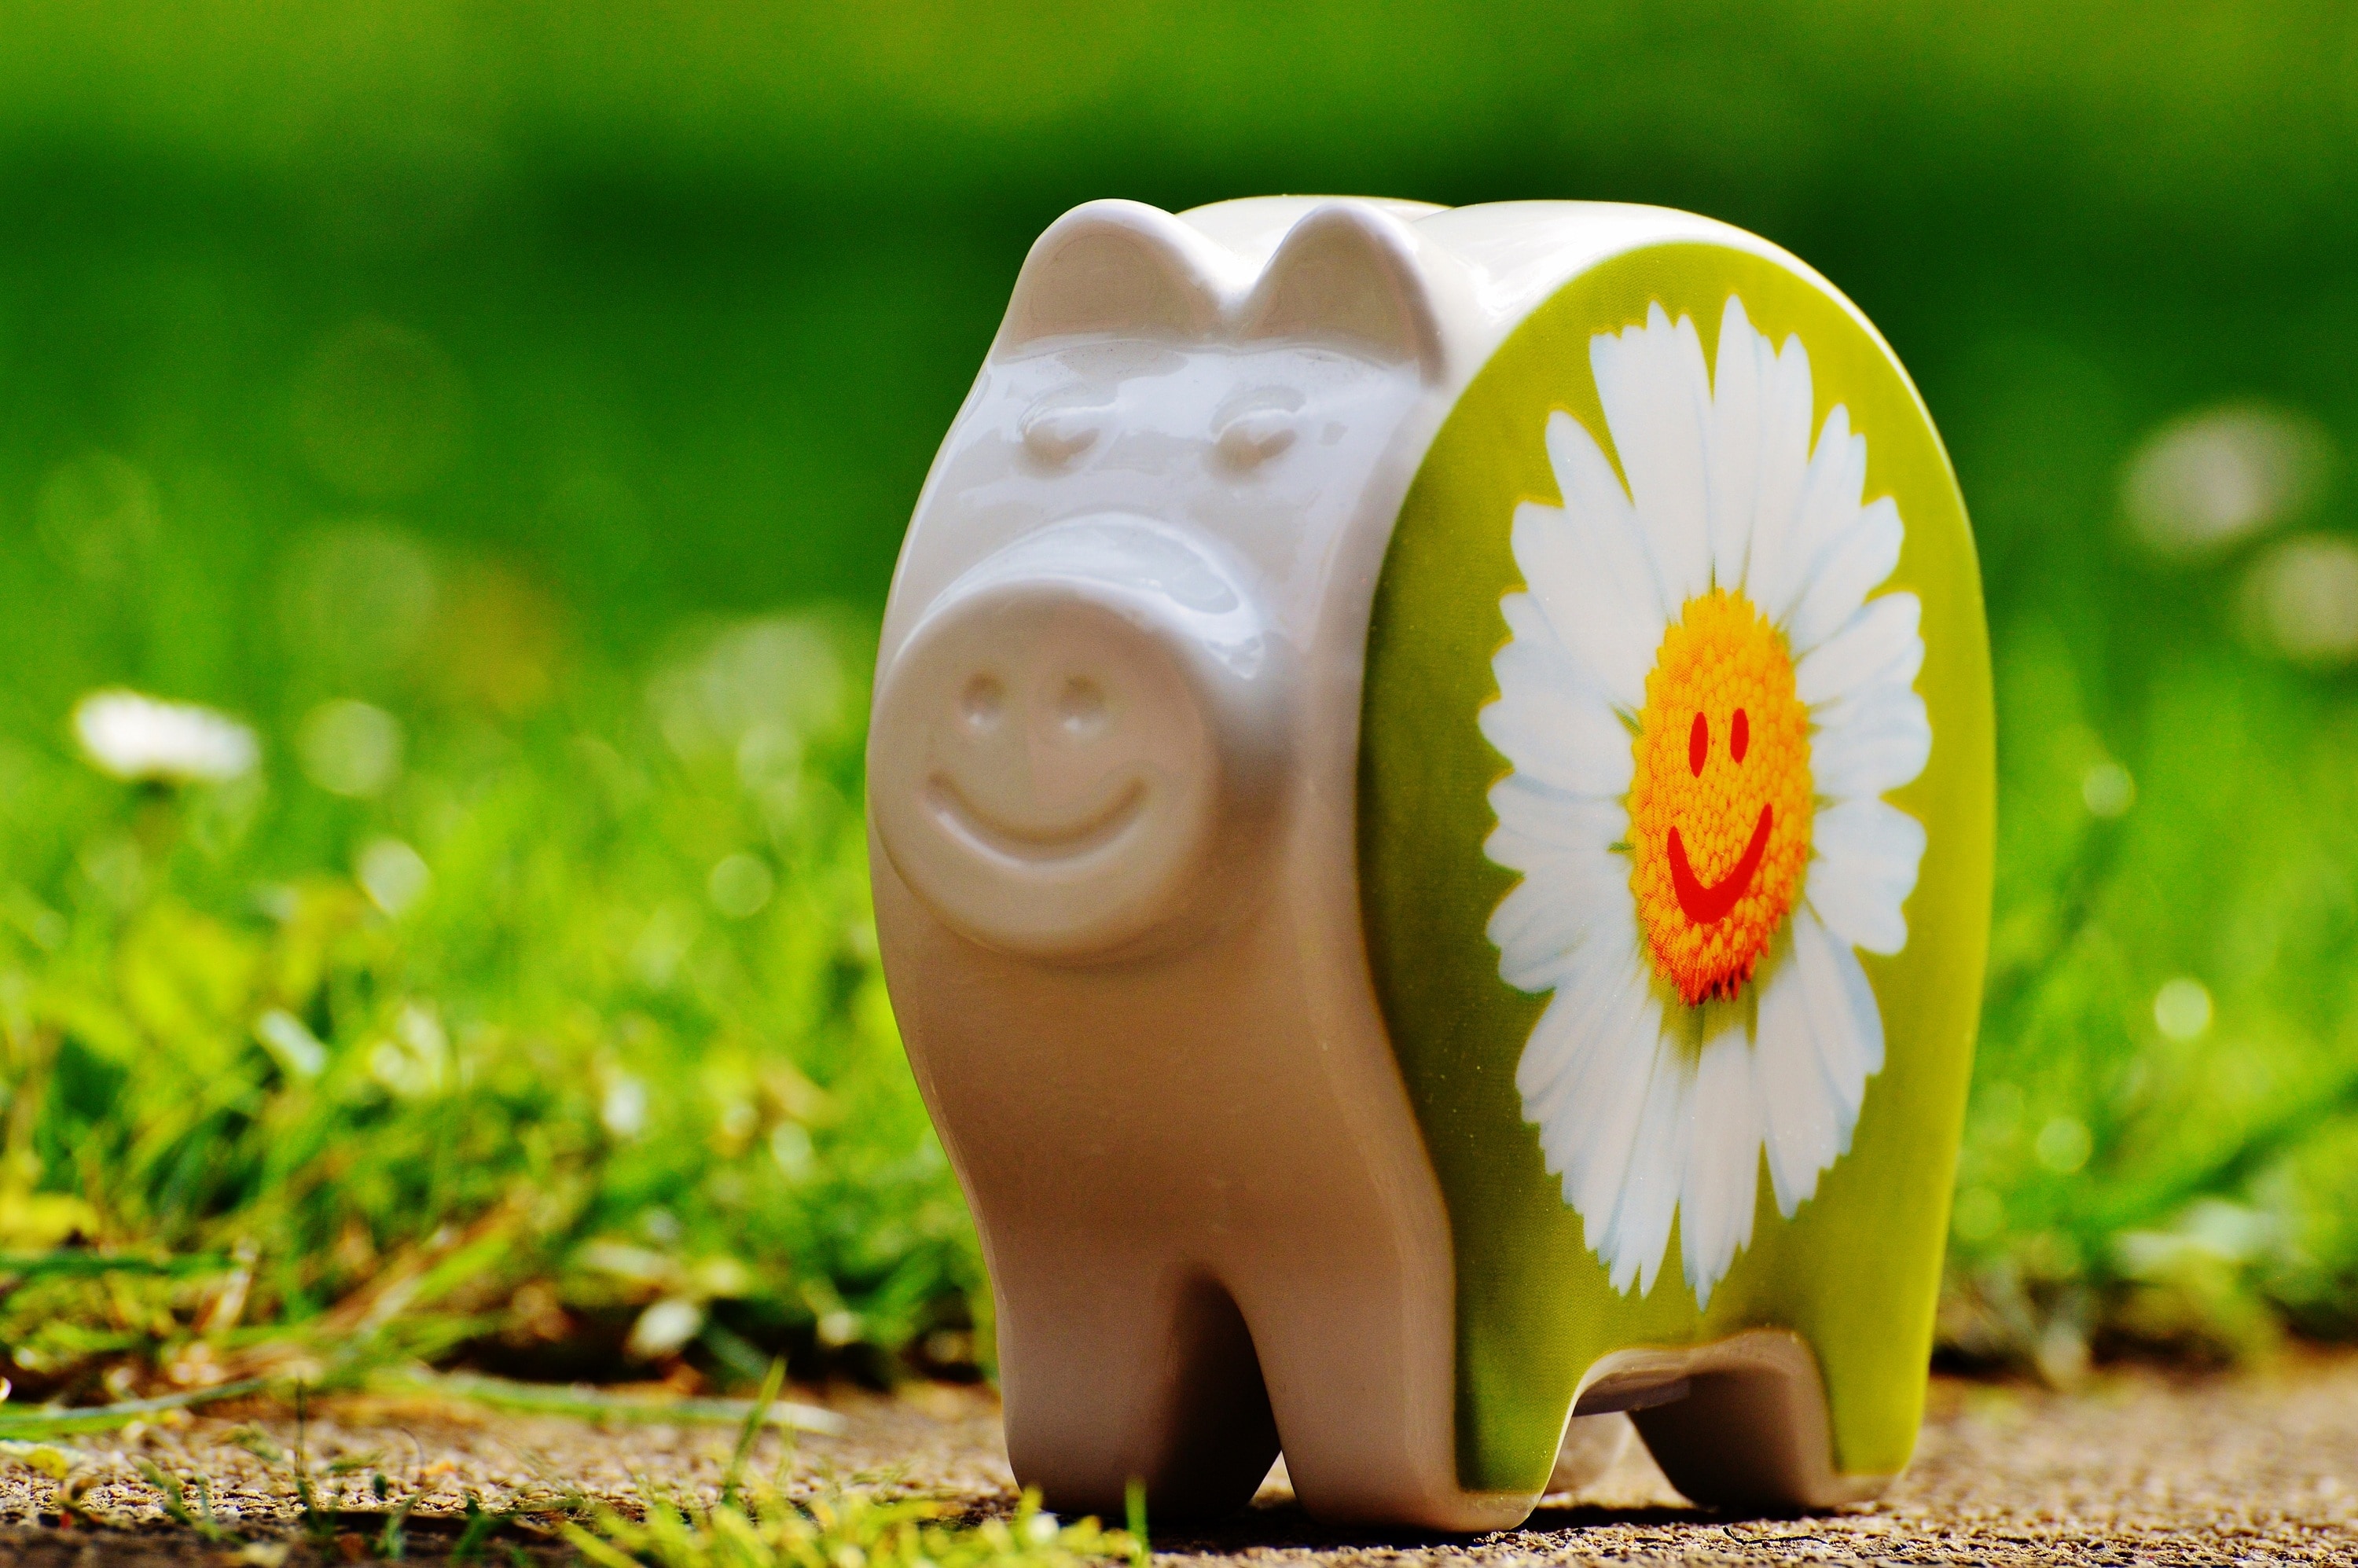 Good Mood, Smiley, Funny, Piggy Bank, grass, day